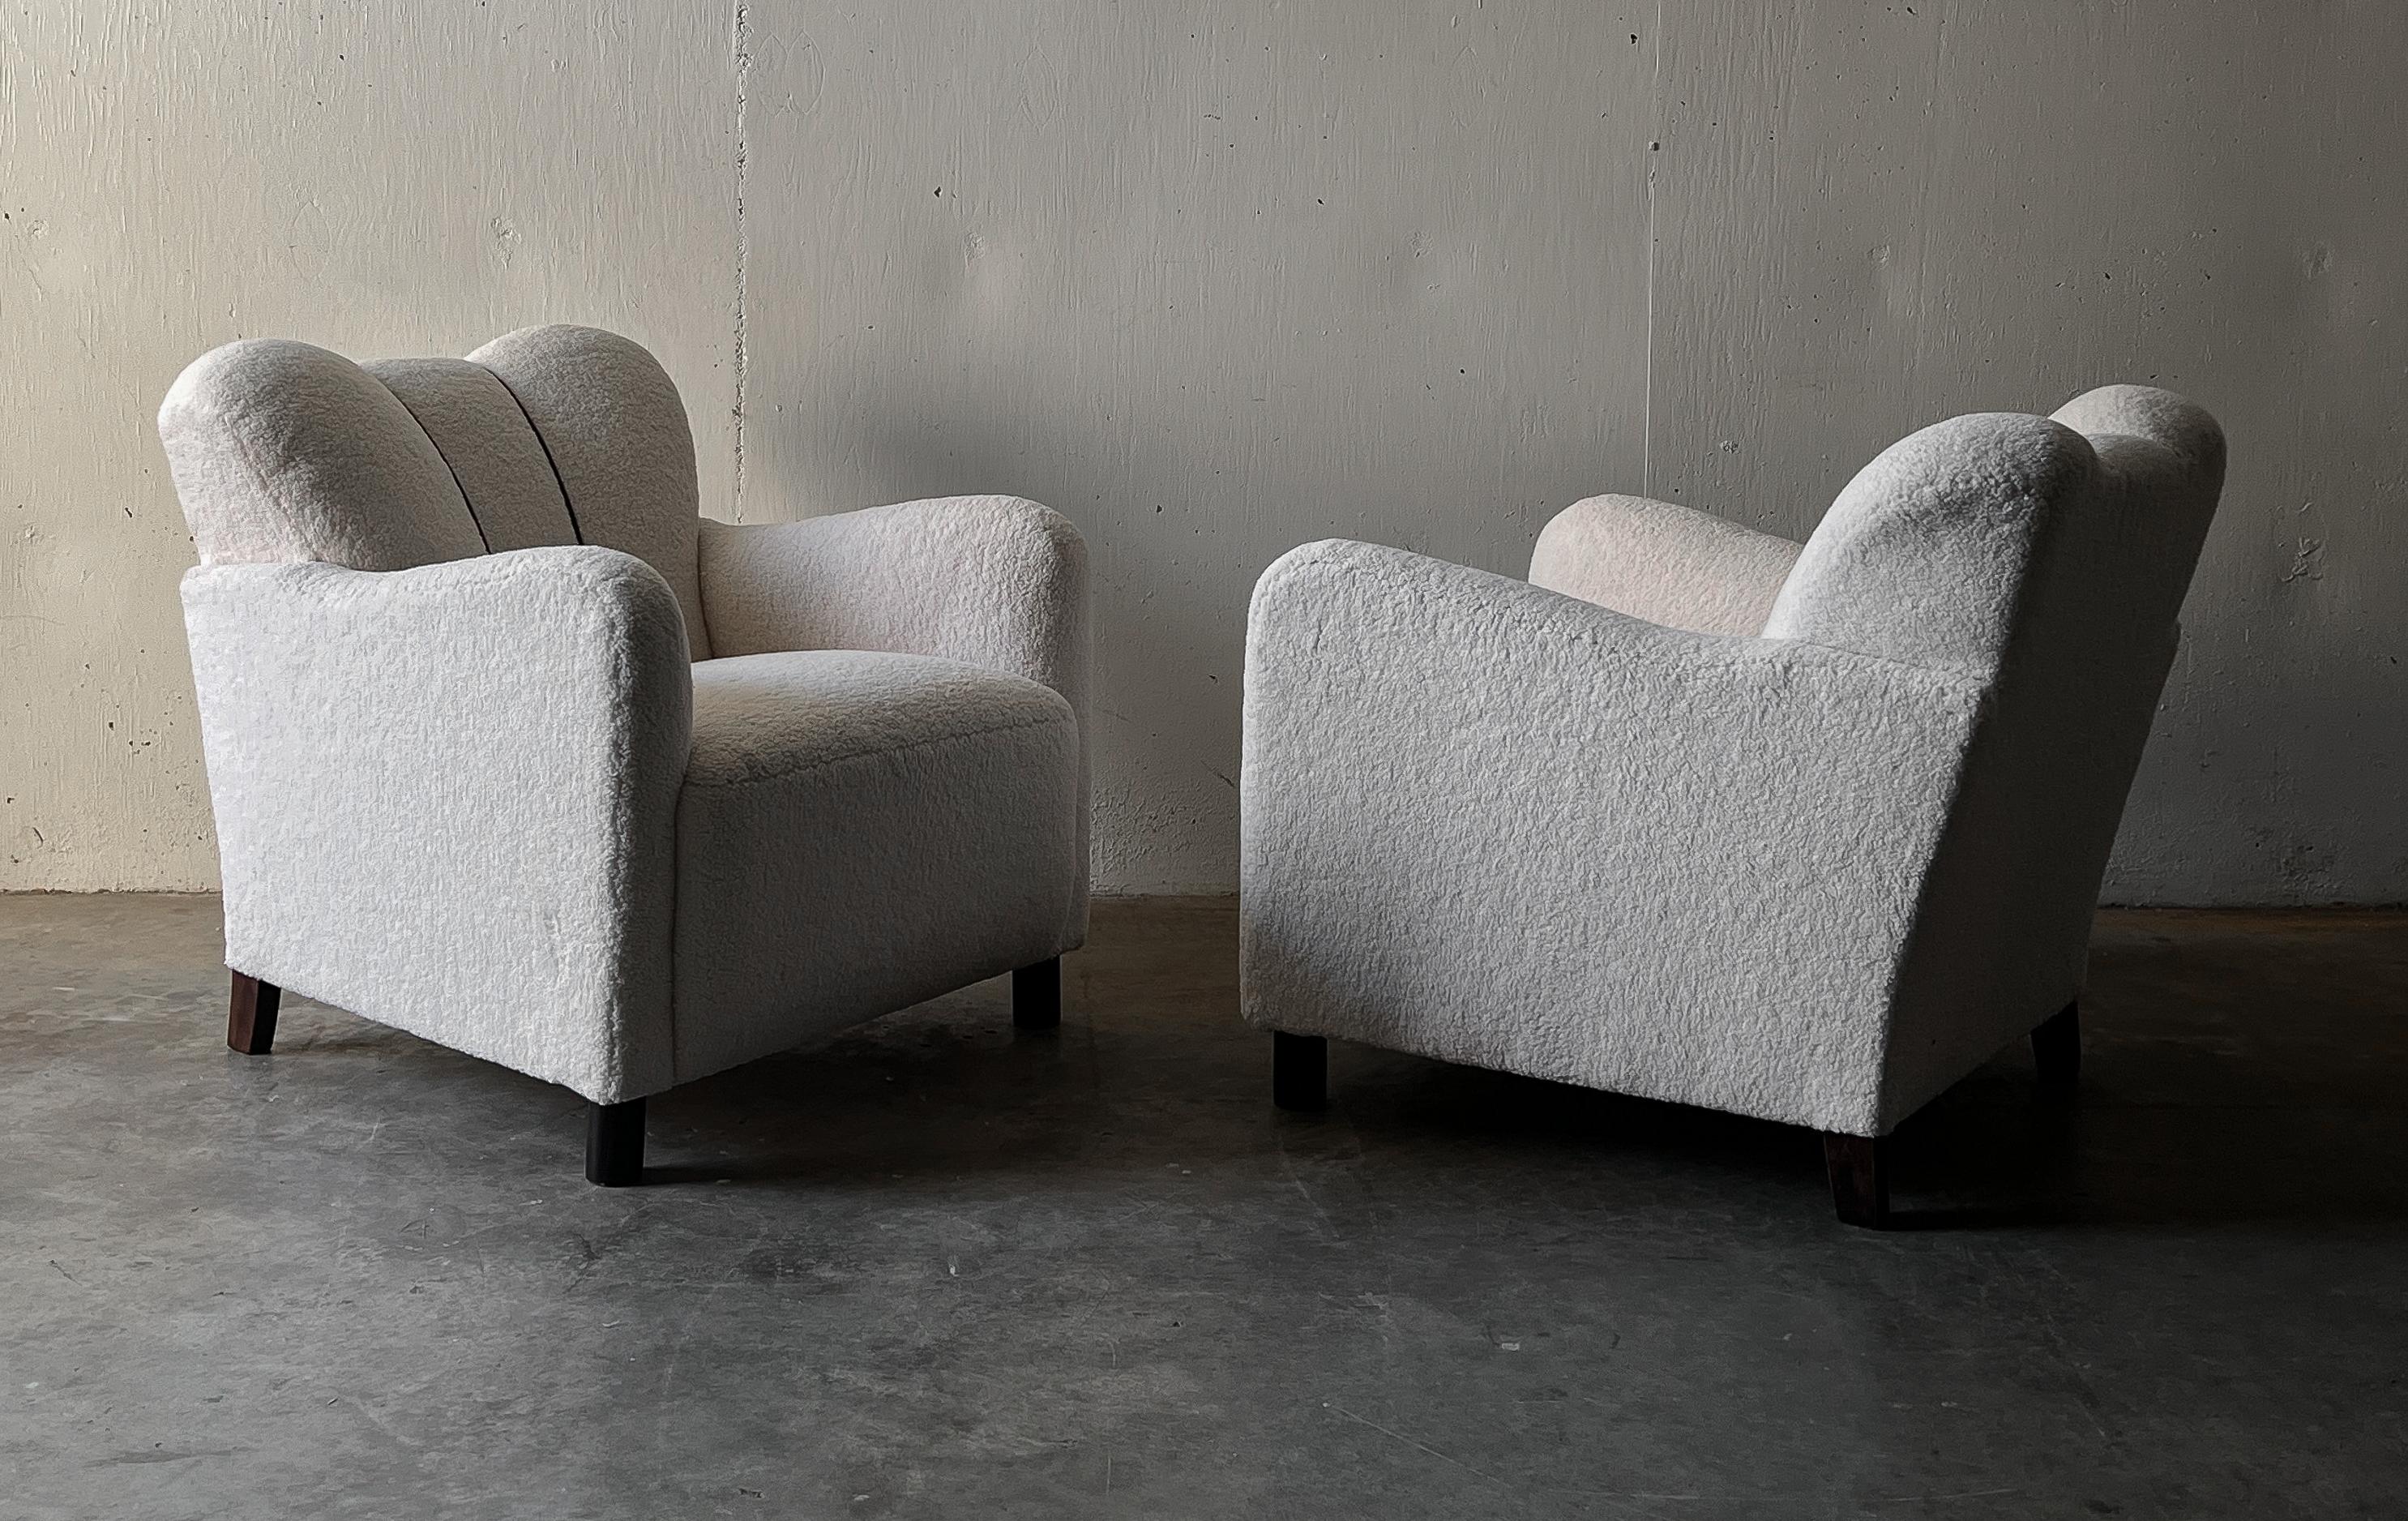 Pair of easy chairs Upholstered with Light Bouclé from Denmark 1930-40s in mint conditions. Very comfortable.